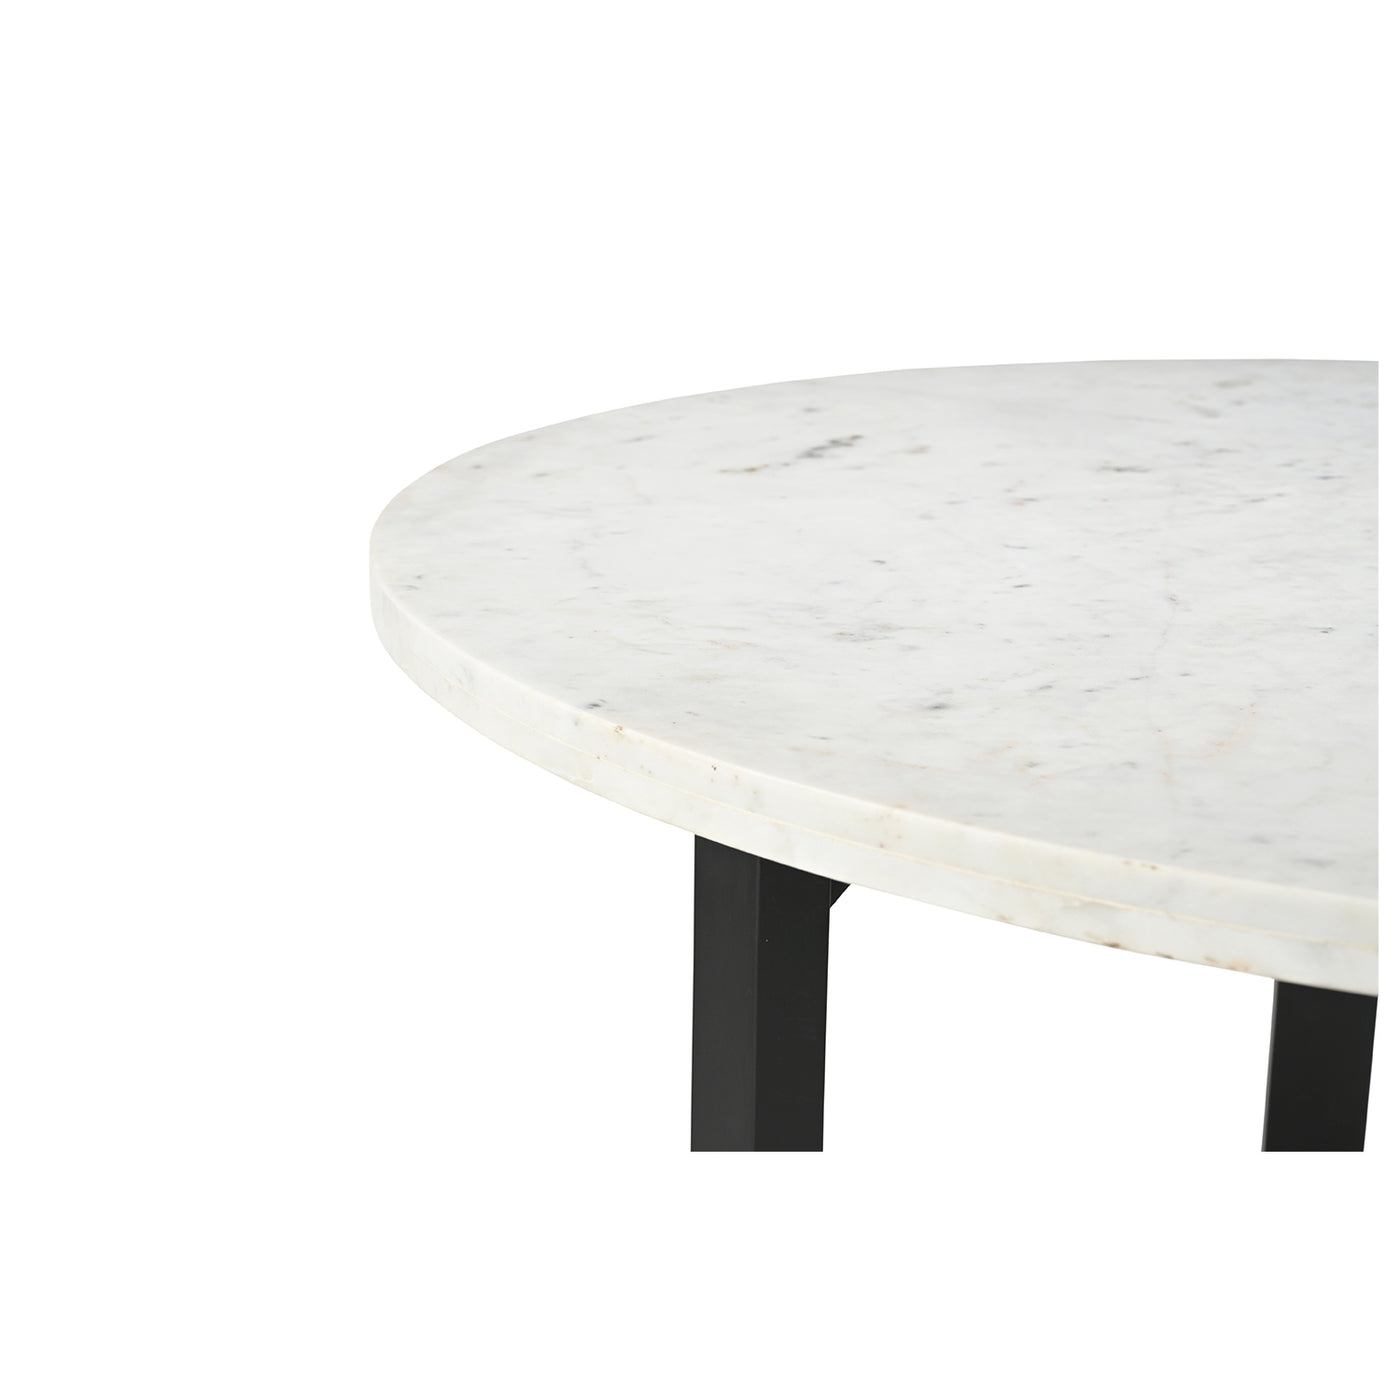 Kenza 48" Round Dining Table